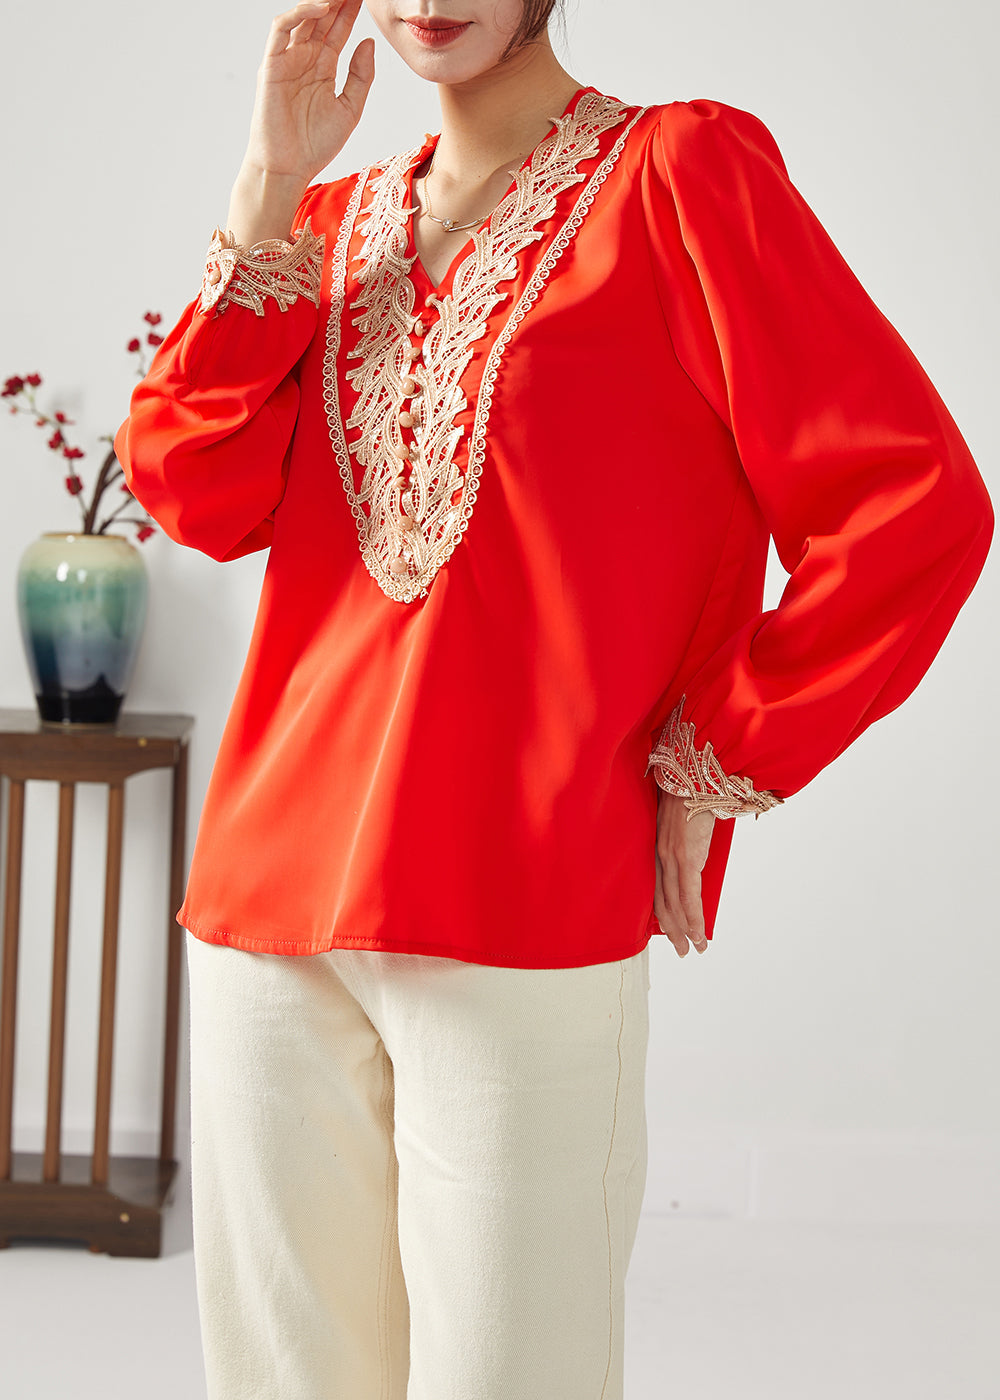 Classy Red V Neck Patchwork Draping Chiffon Tops Spring LC0384 - fabuloryshop